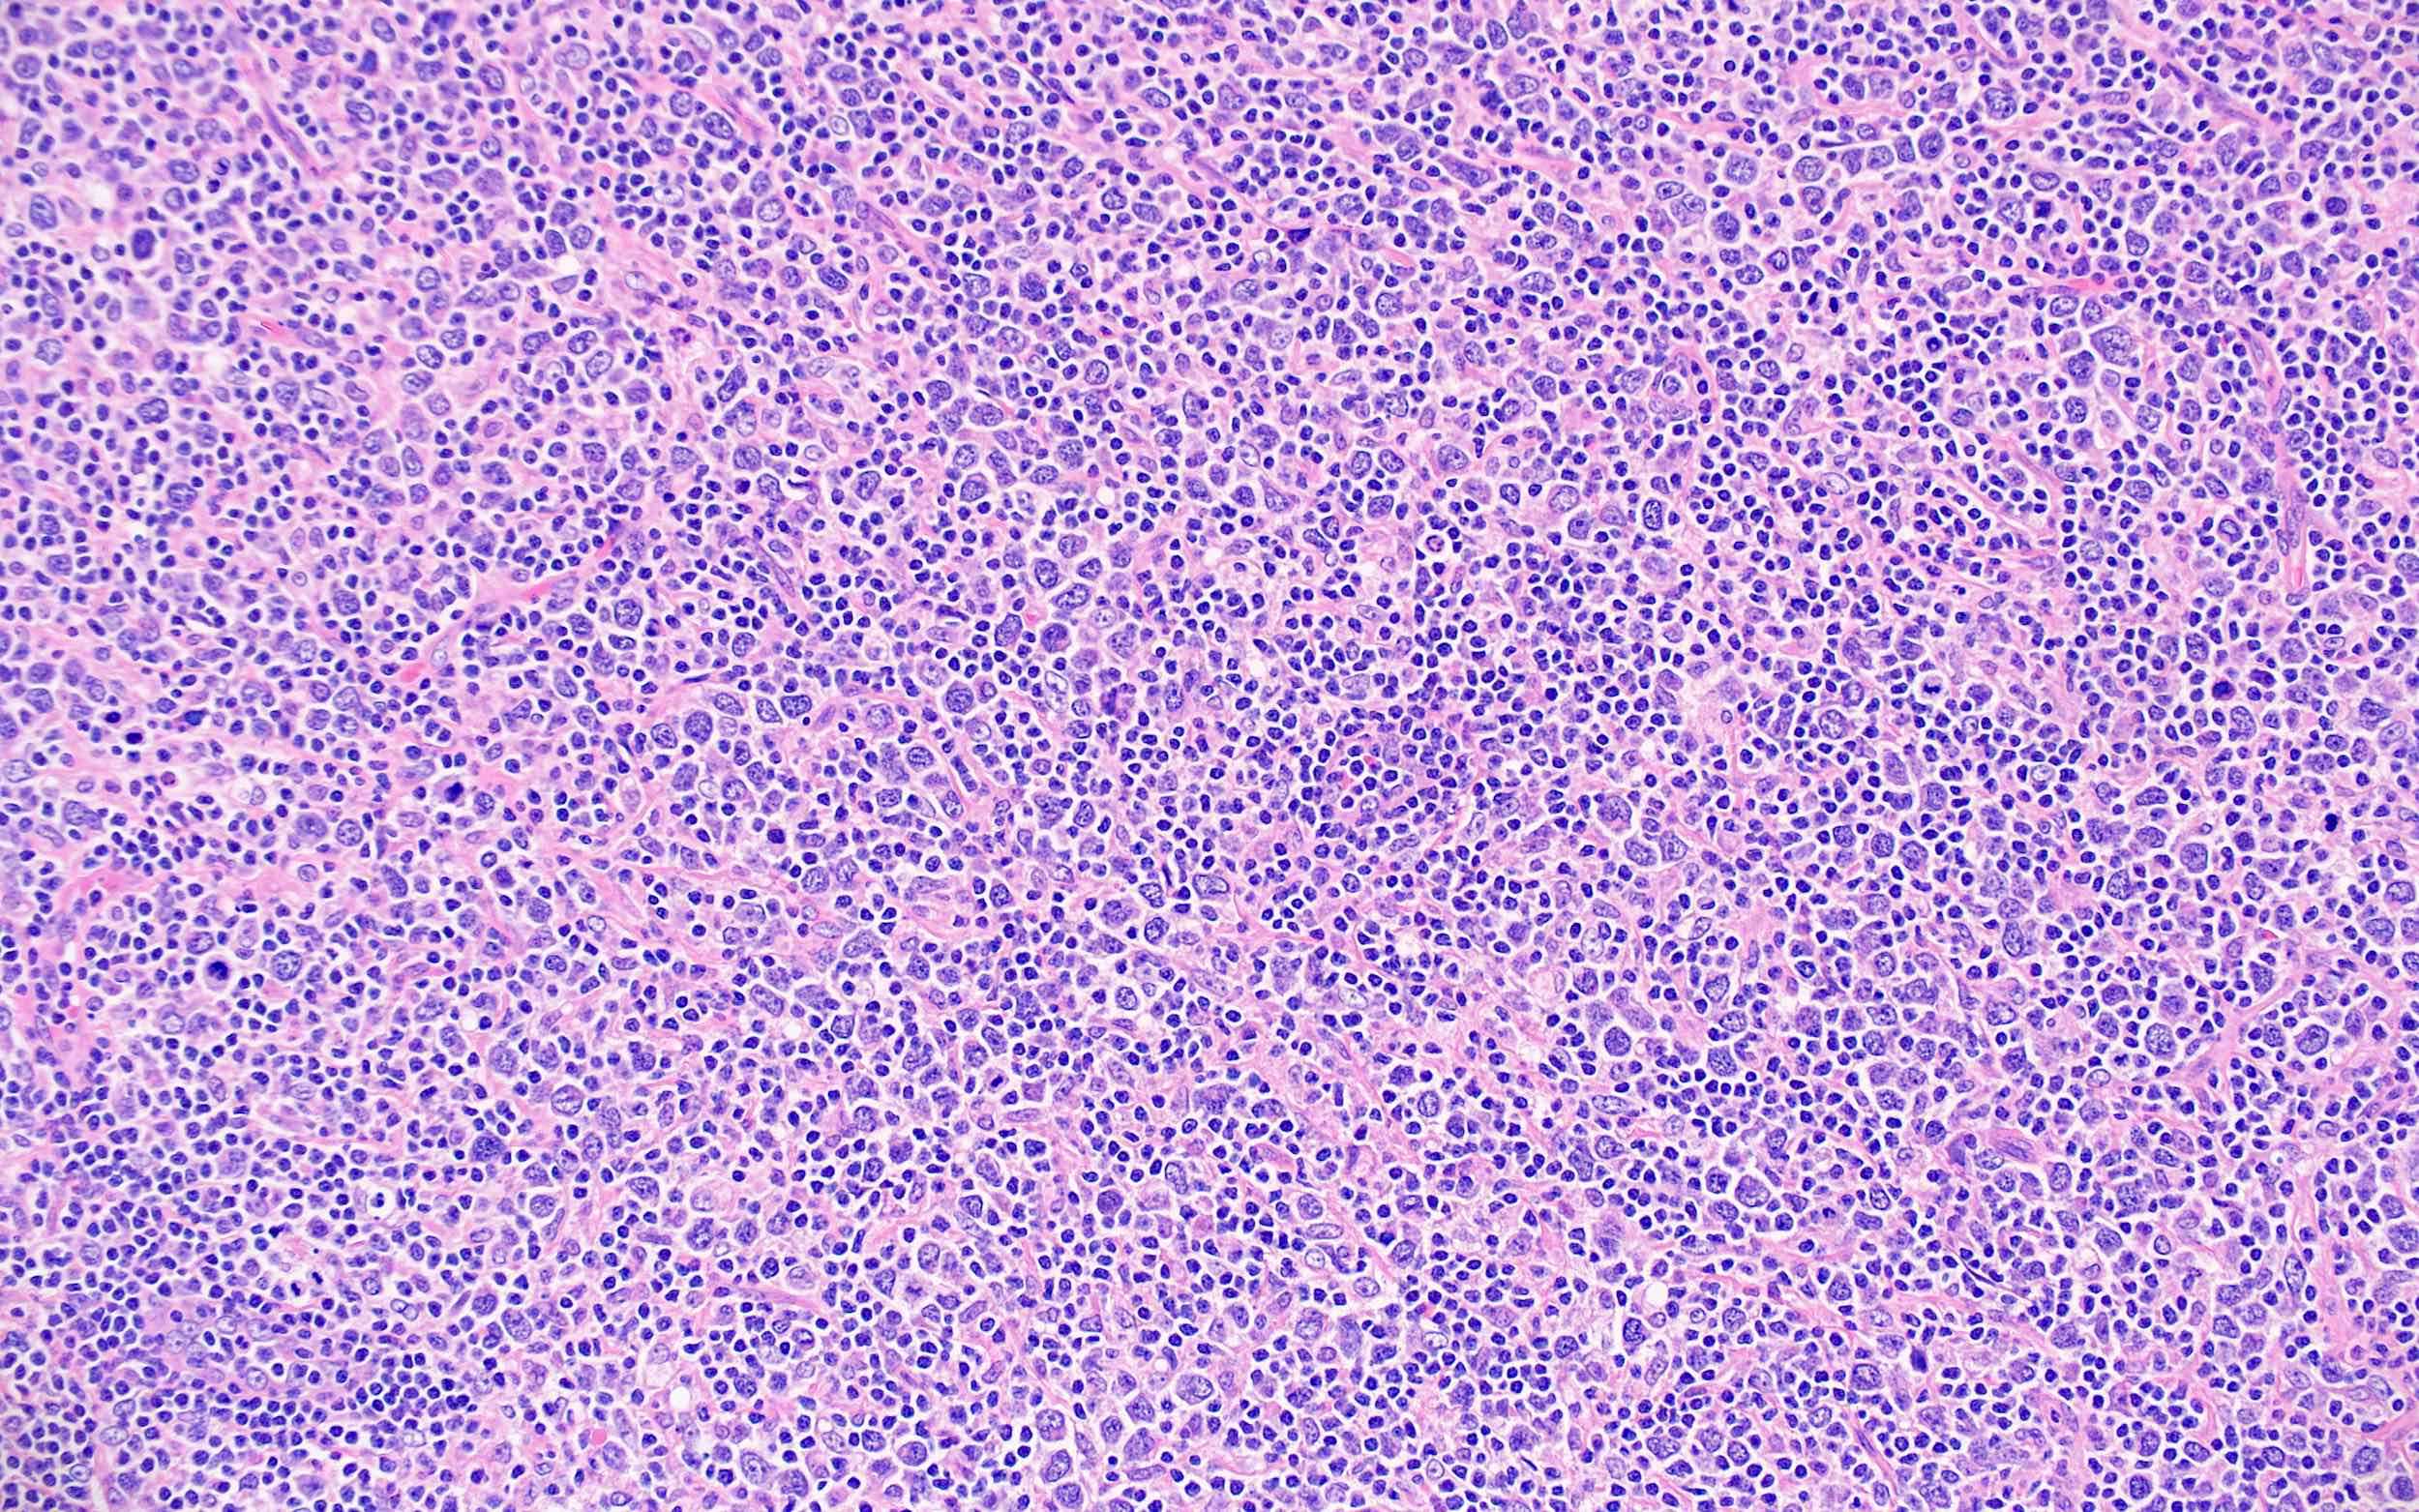 Large atypical cells of DLBCL